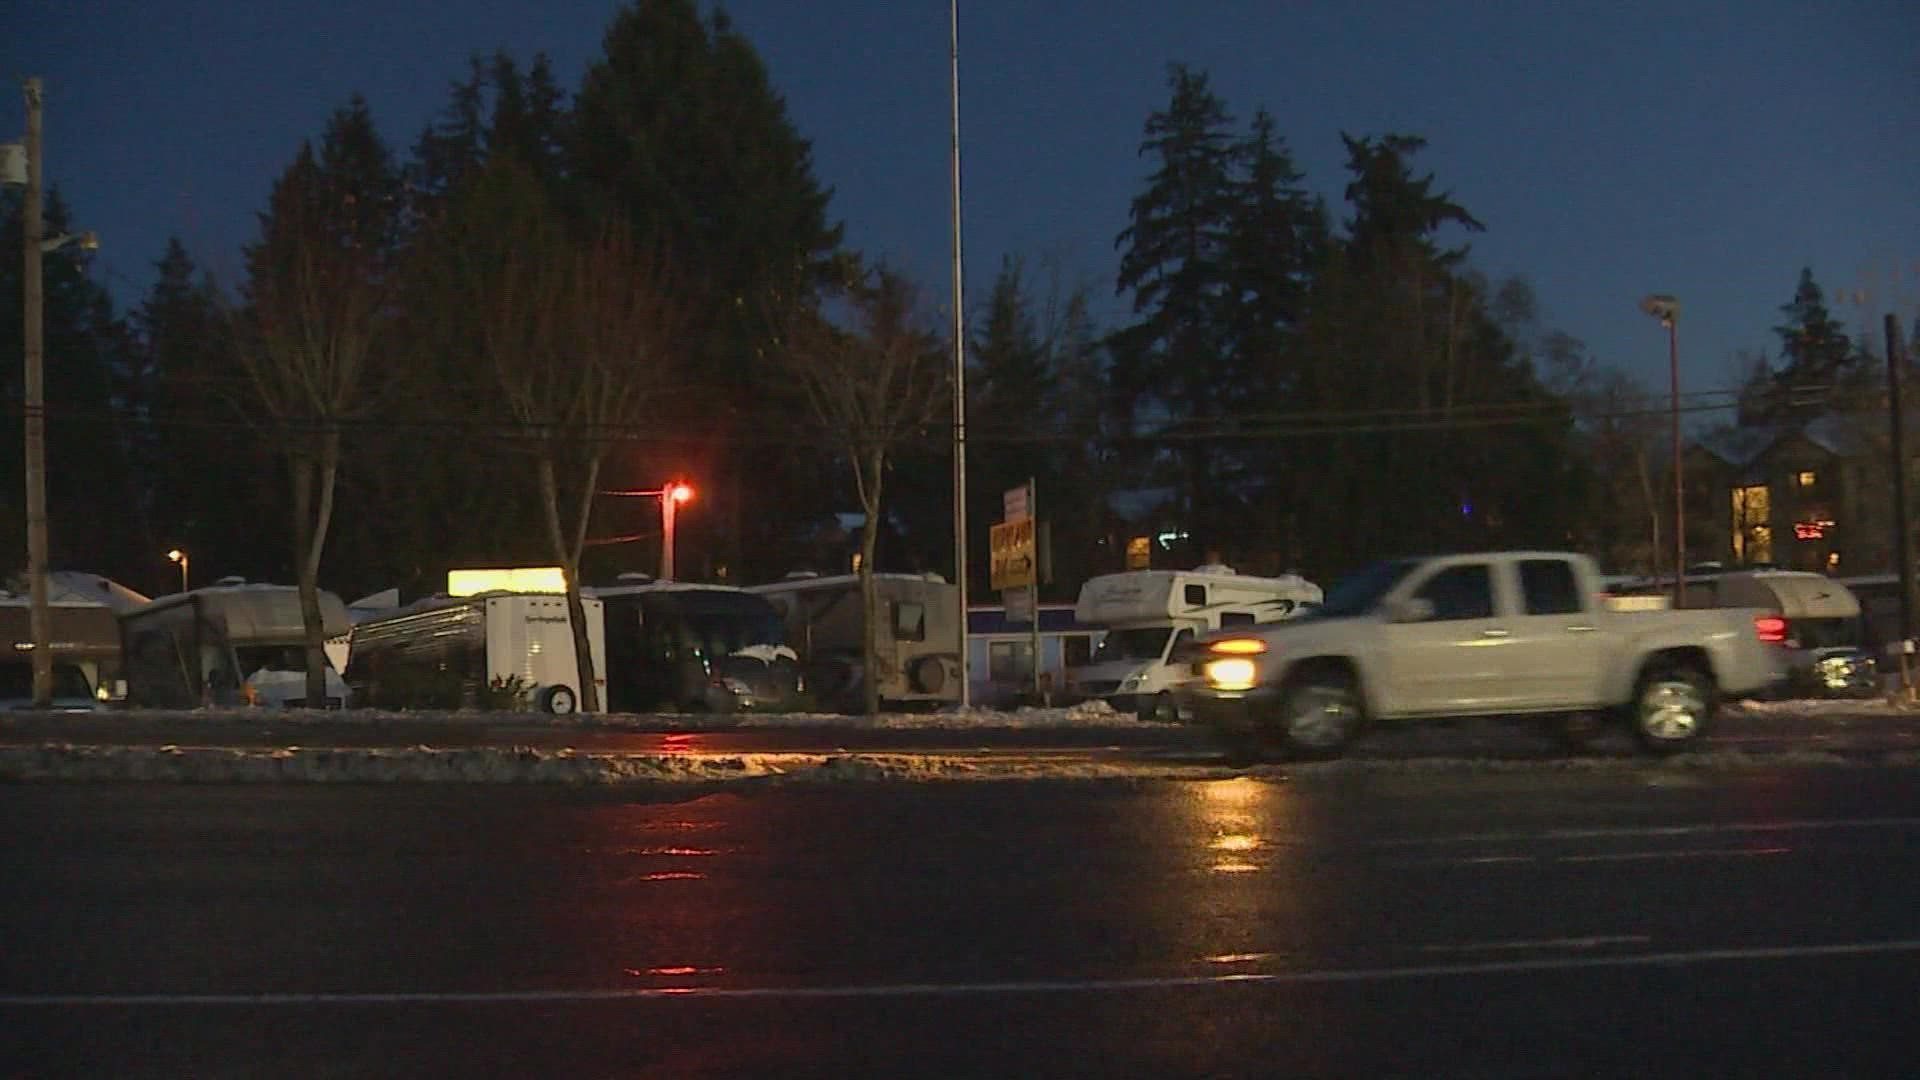 A suspect has been taken into custody for vehicular homicide after he allegedly struck a man who was shoveling snow along State Route 99 in Everett on Dec. 3.